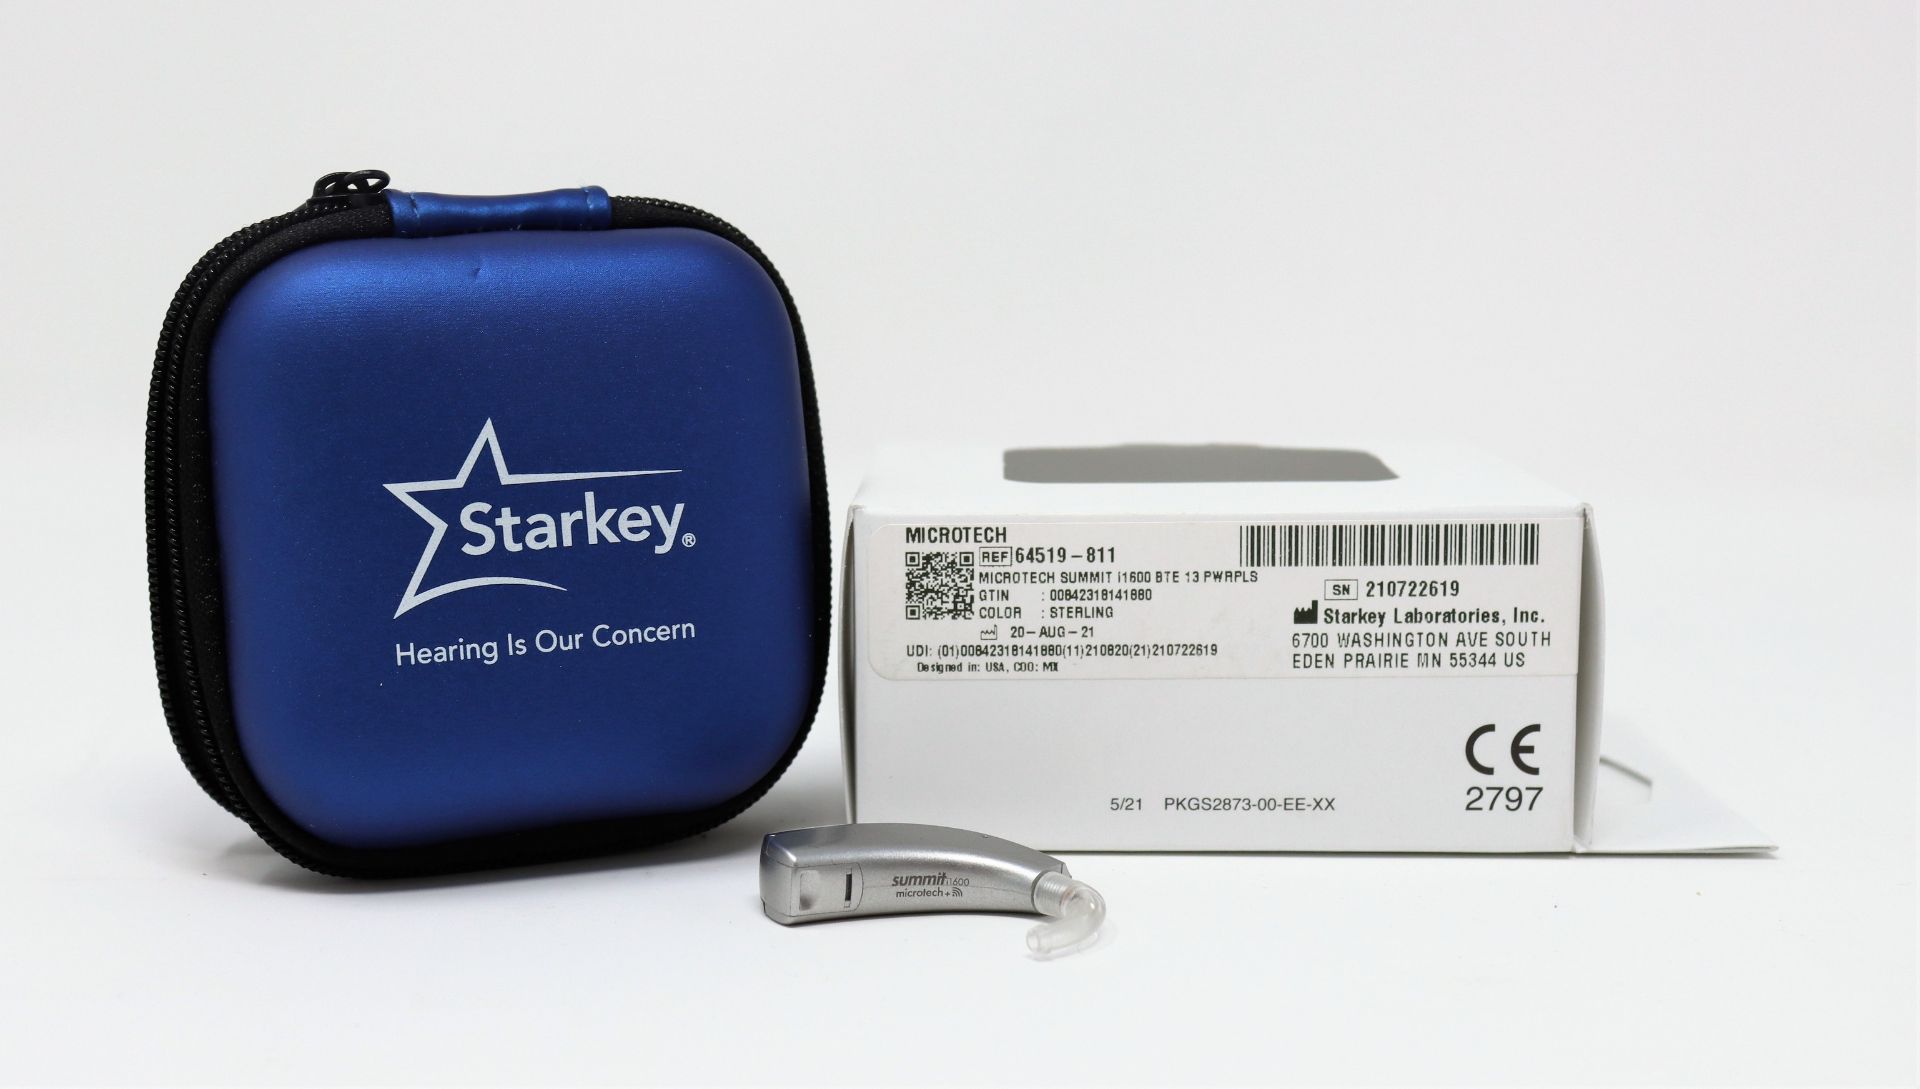 A boxed as new Starkey Summit BTE Power Plus 13 Hearing Aid in Sterling (REF: 64519-811).